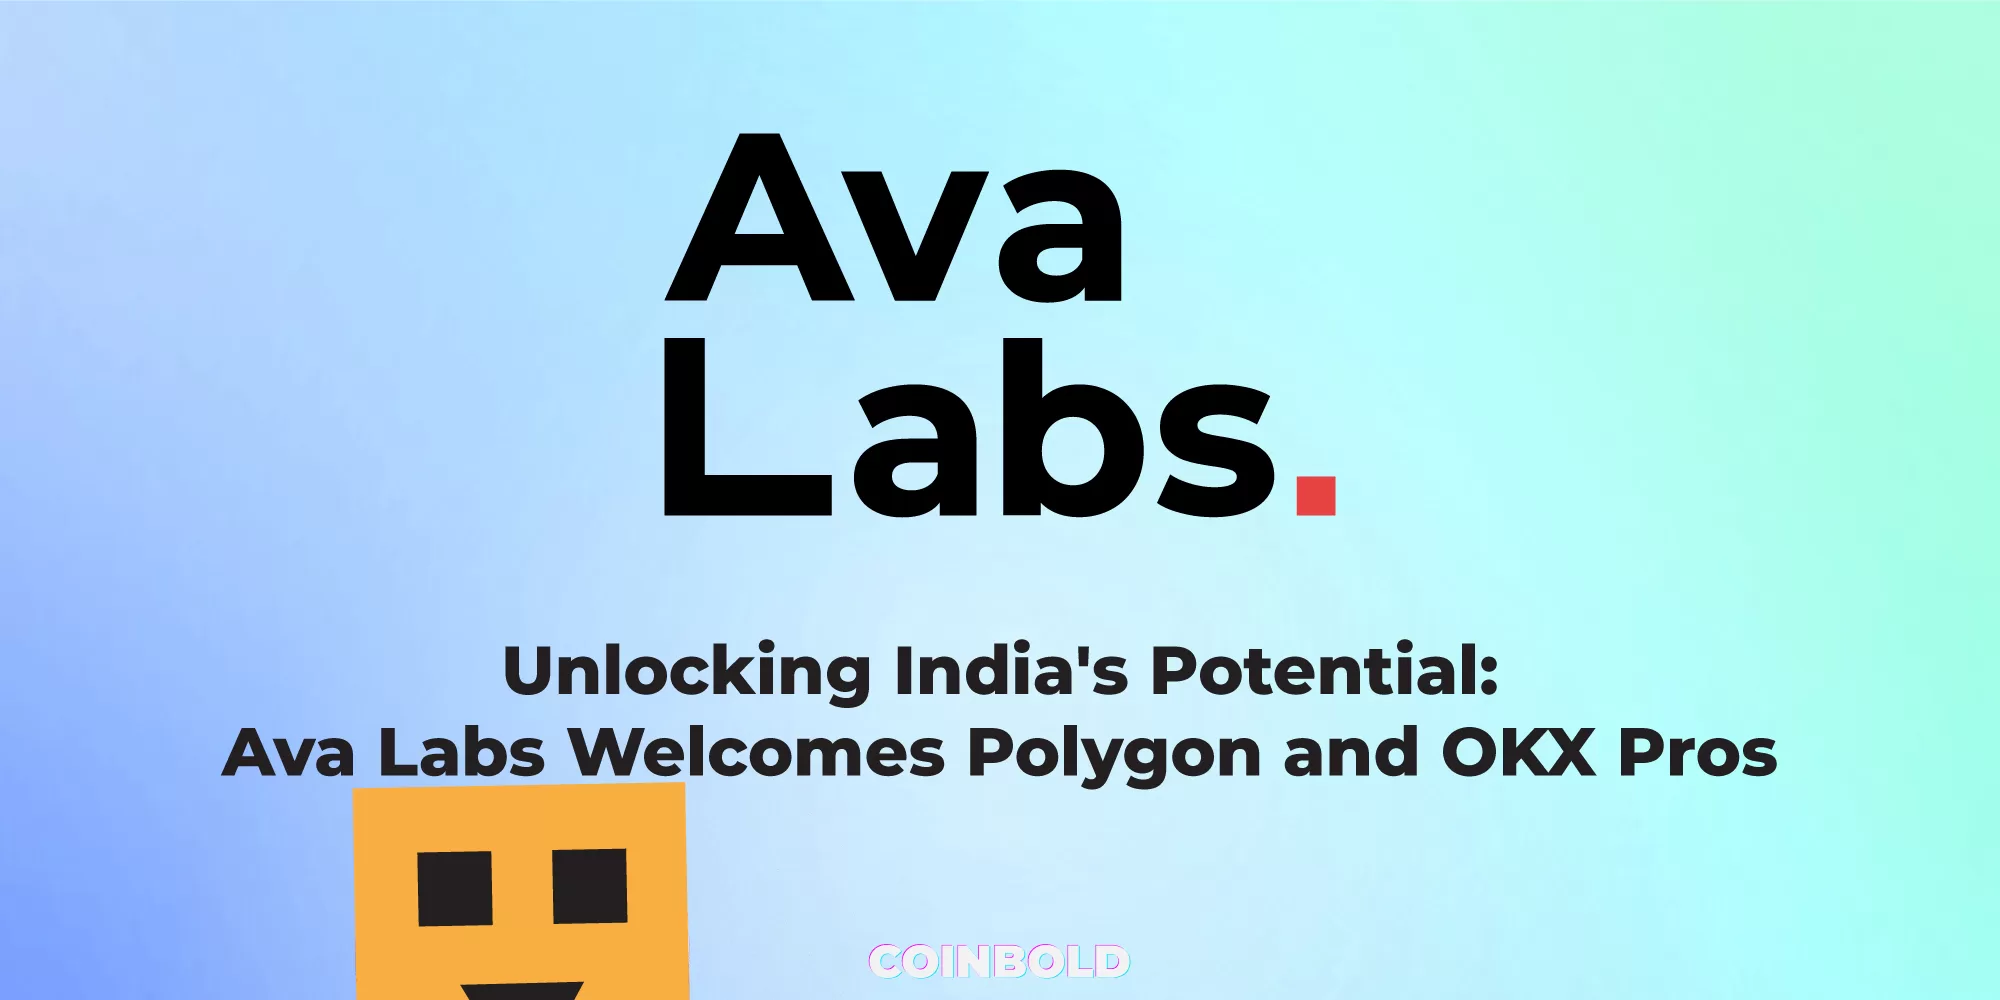 Unlocking India's Potential Ava Labs Welcomes Polygon and OKX Pros